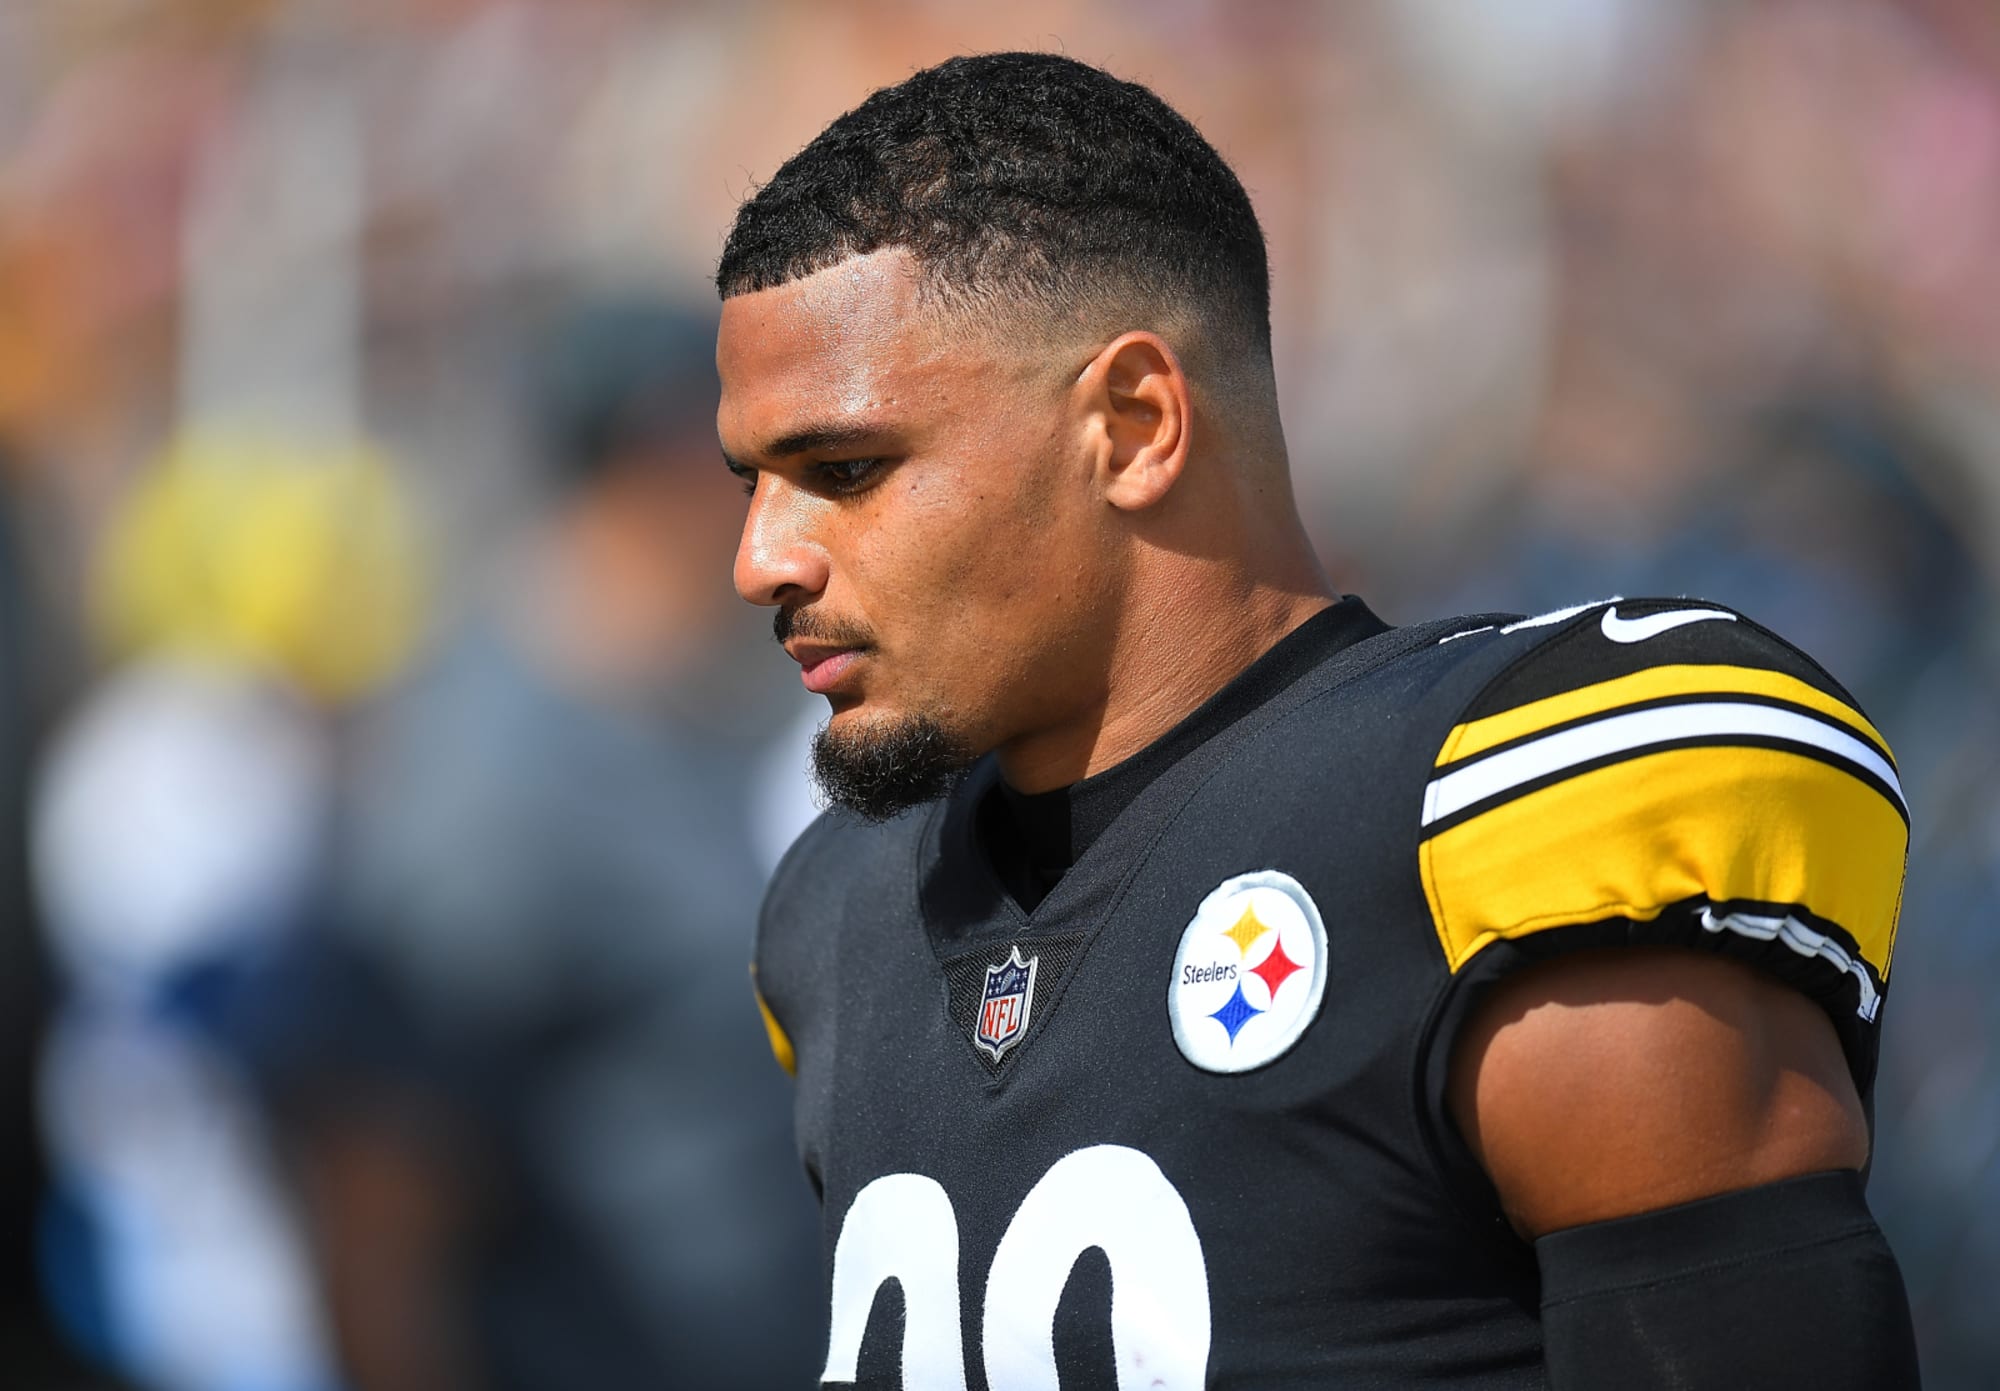 Ranking the best players on the Steelers roster ahead of the 2022 season